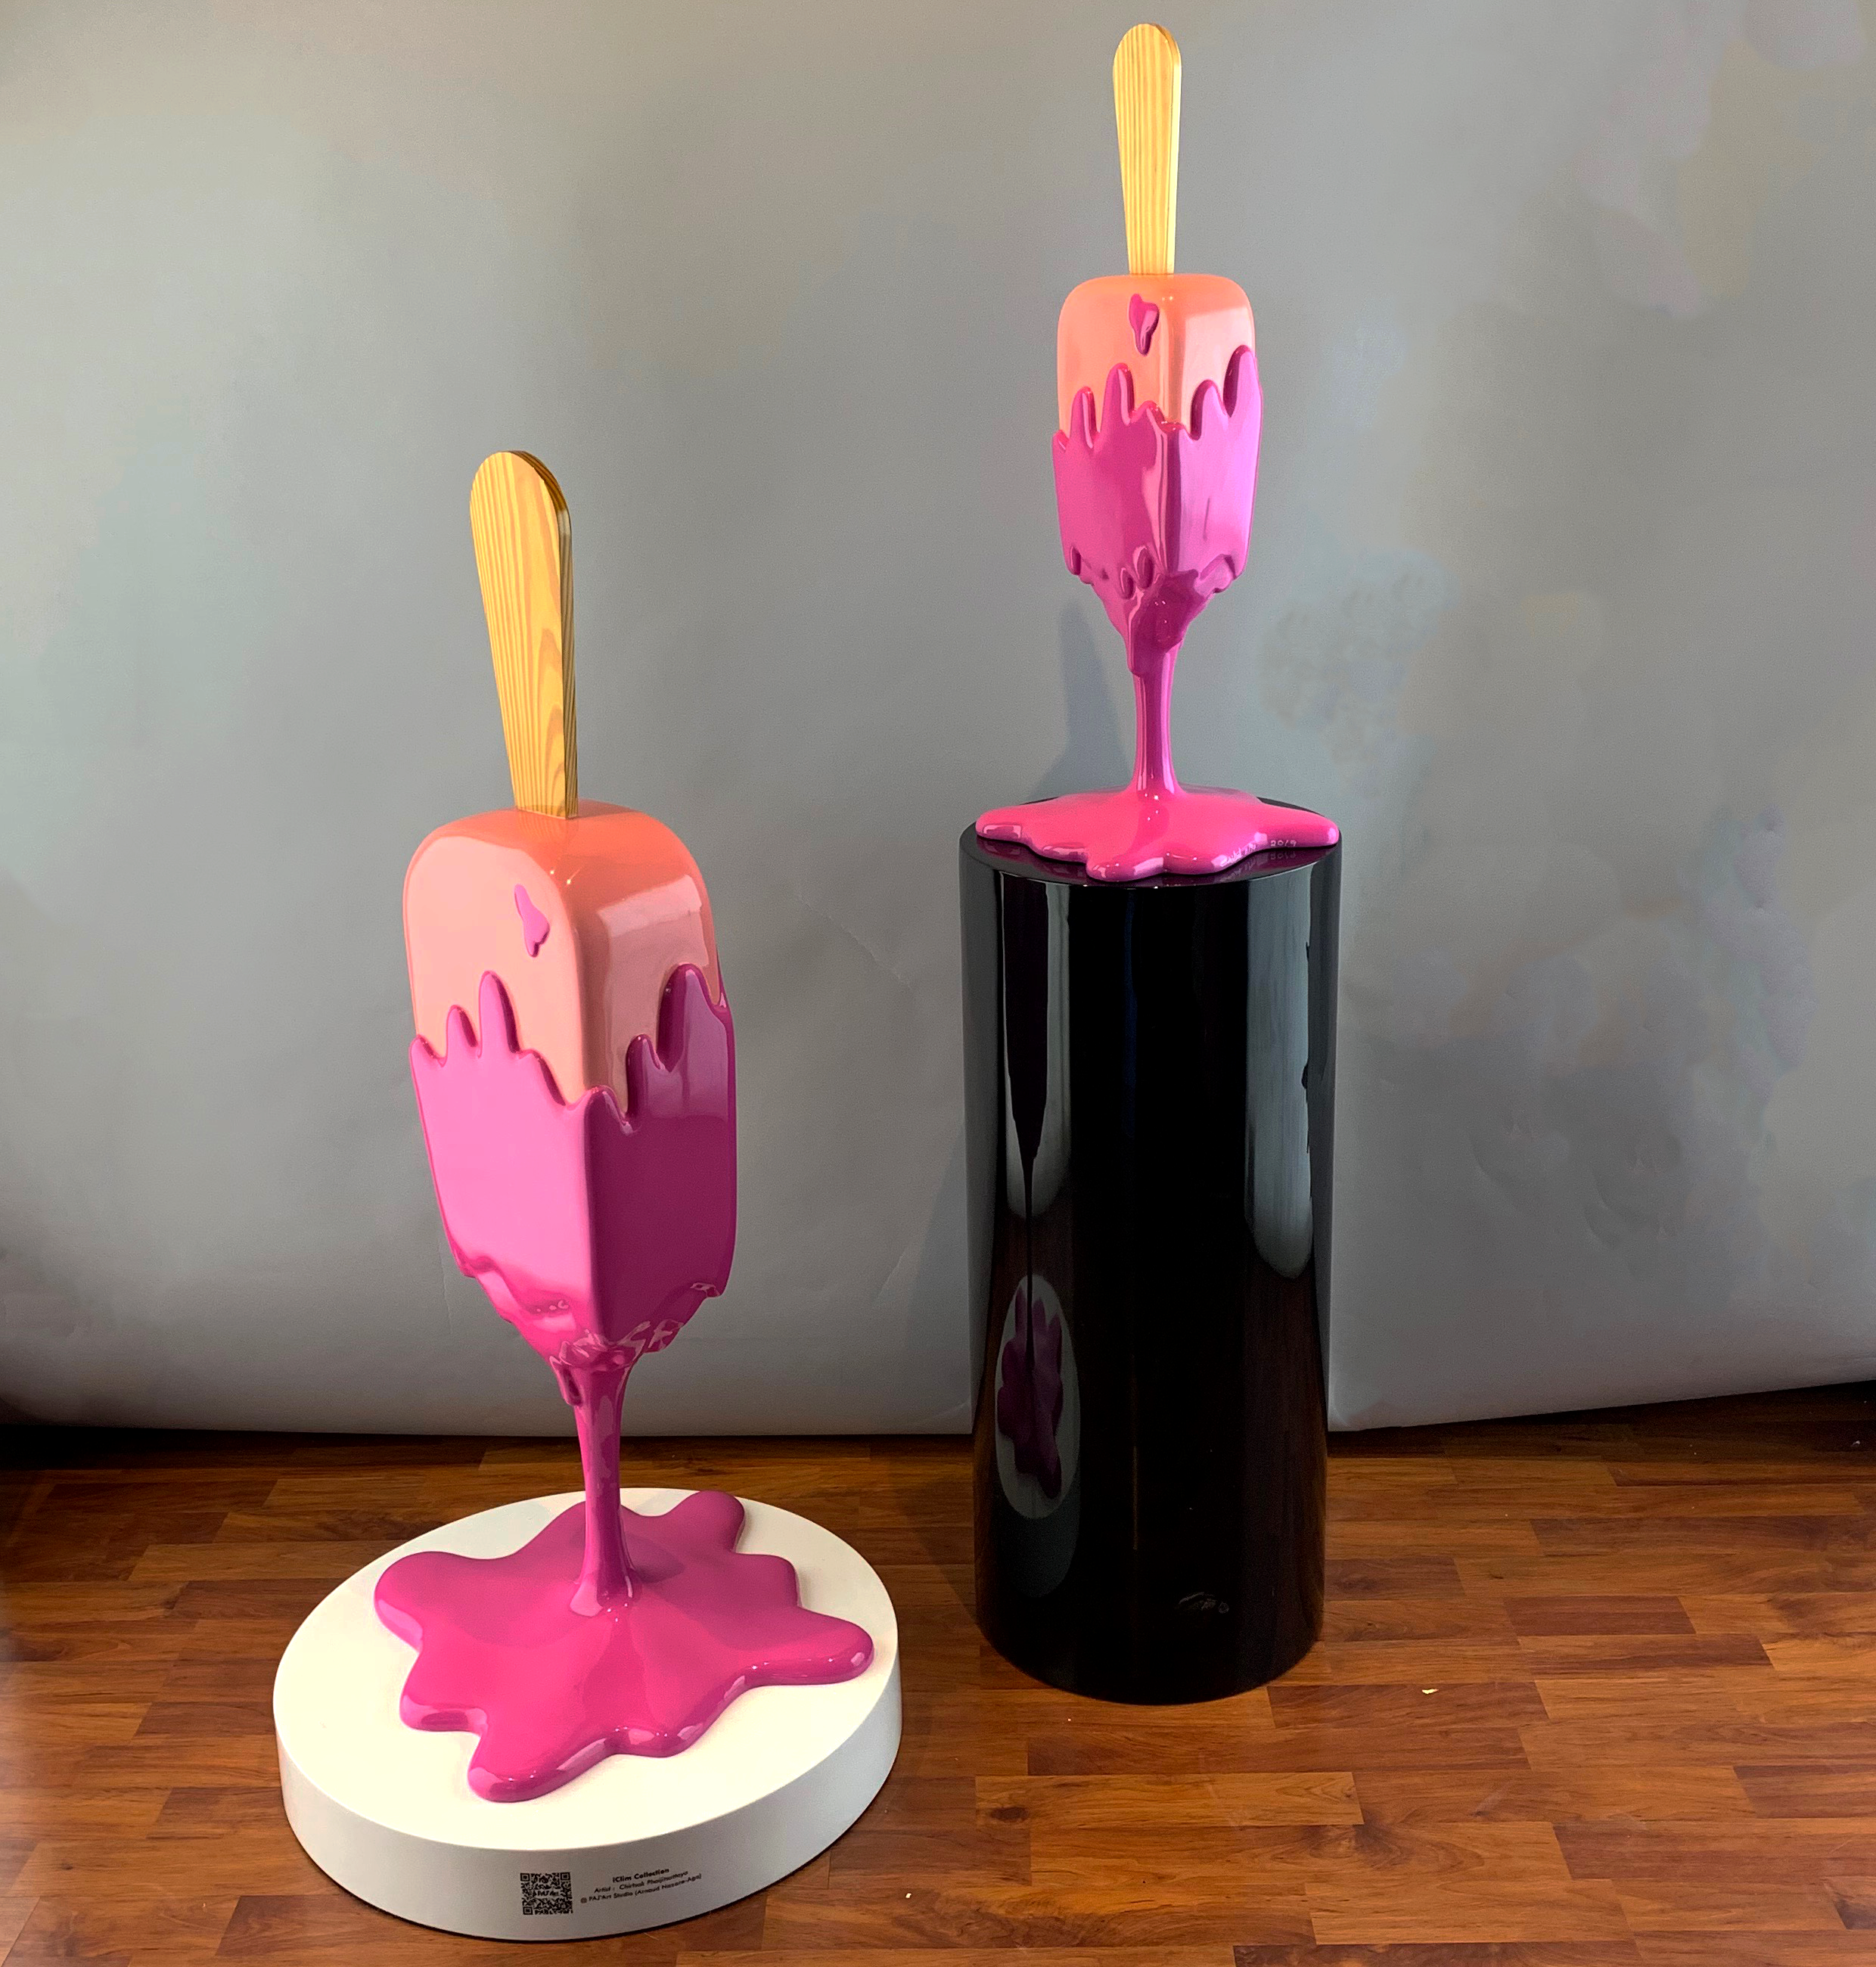 Big and small strawberry ice creams pop art sculptures